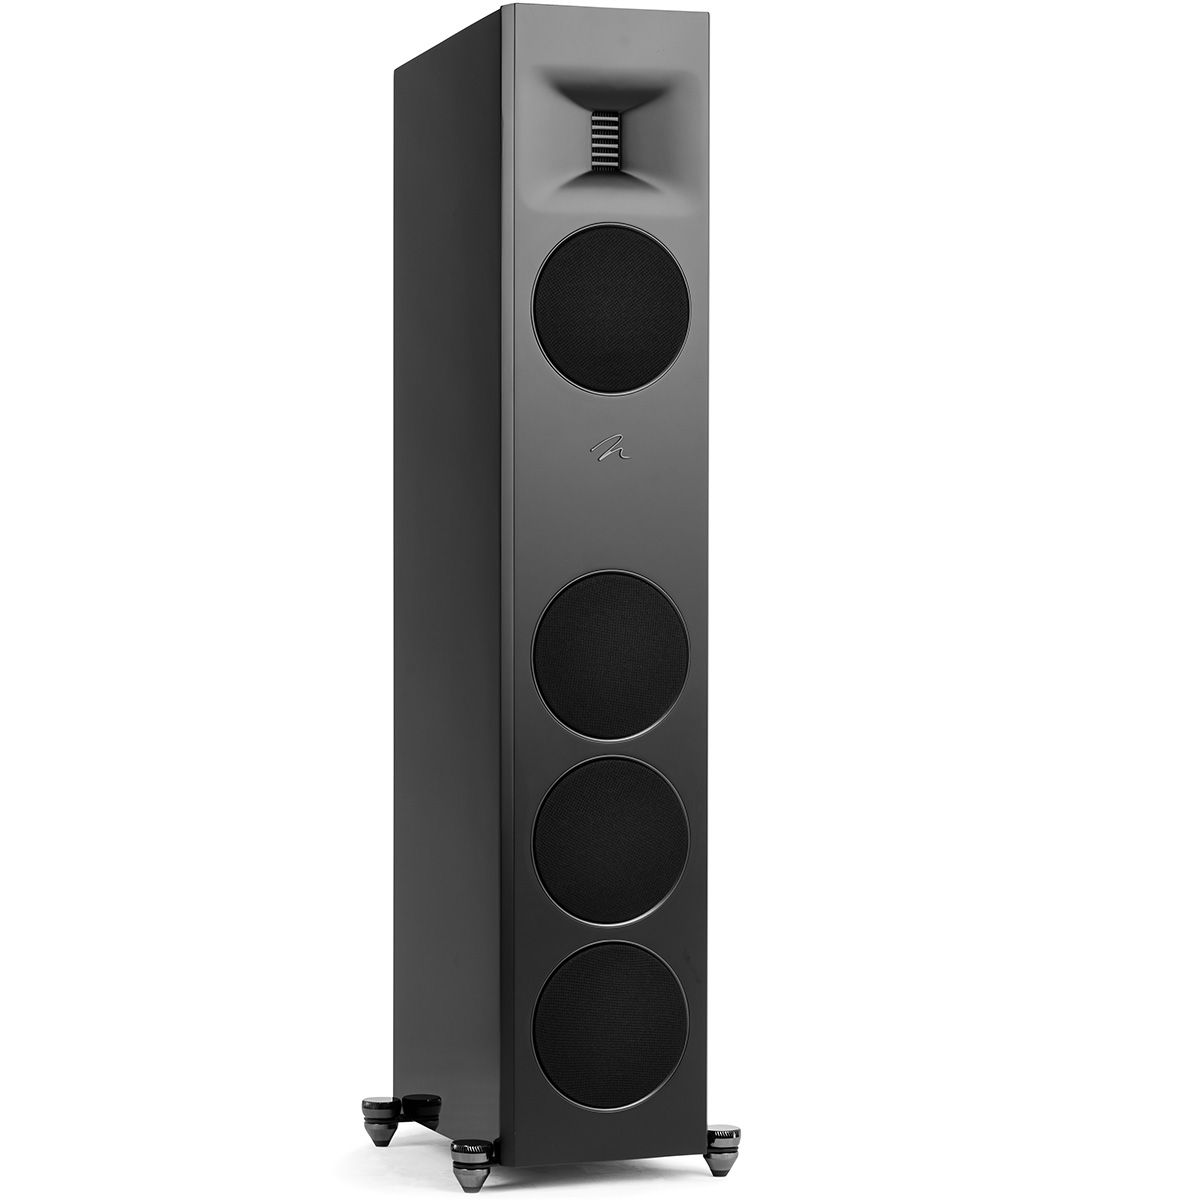 MartinLogan Motion XT F100  Floorstanding Speaker in black, angled view with grilles on white background